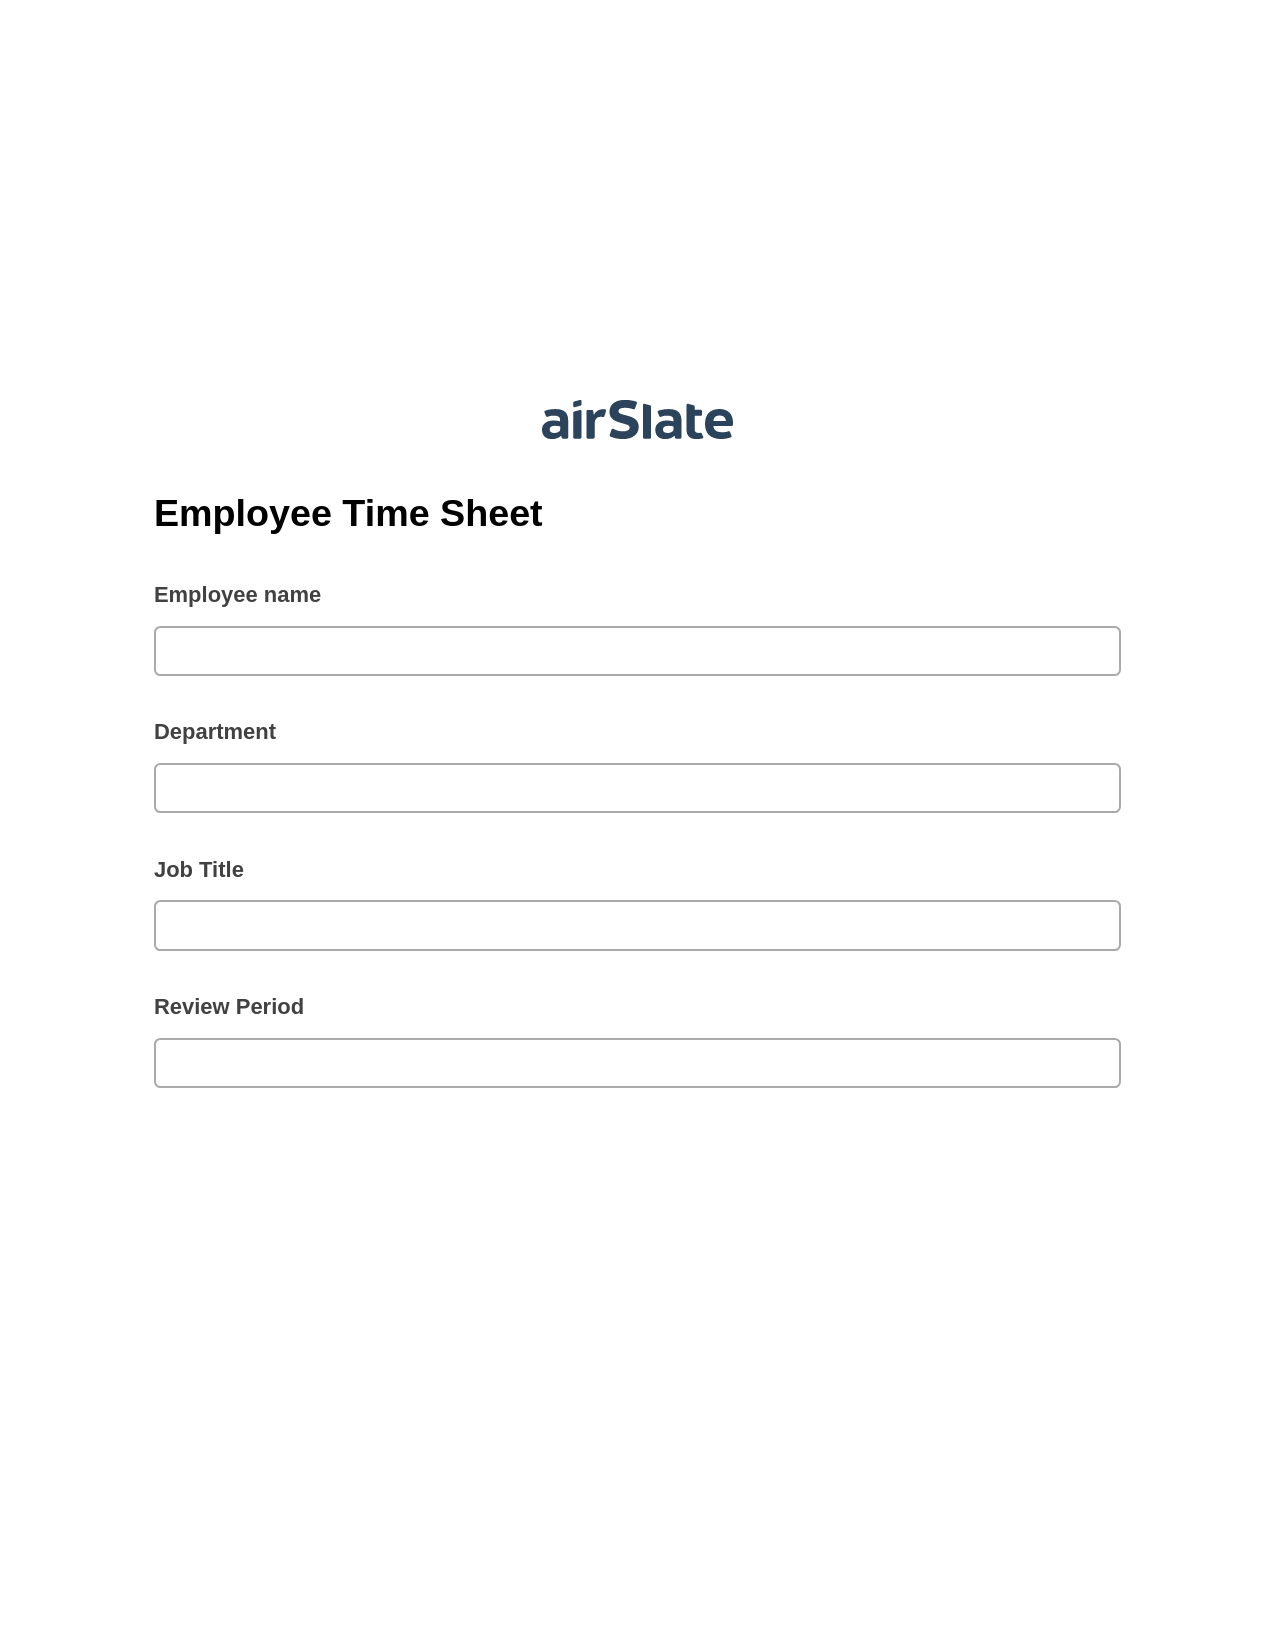 Employee Time Sheet Pre-fill Document Bot, Assign Roles to Recipients Bot, Export to Excel 365 Bot